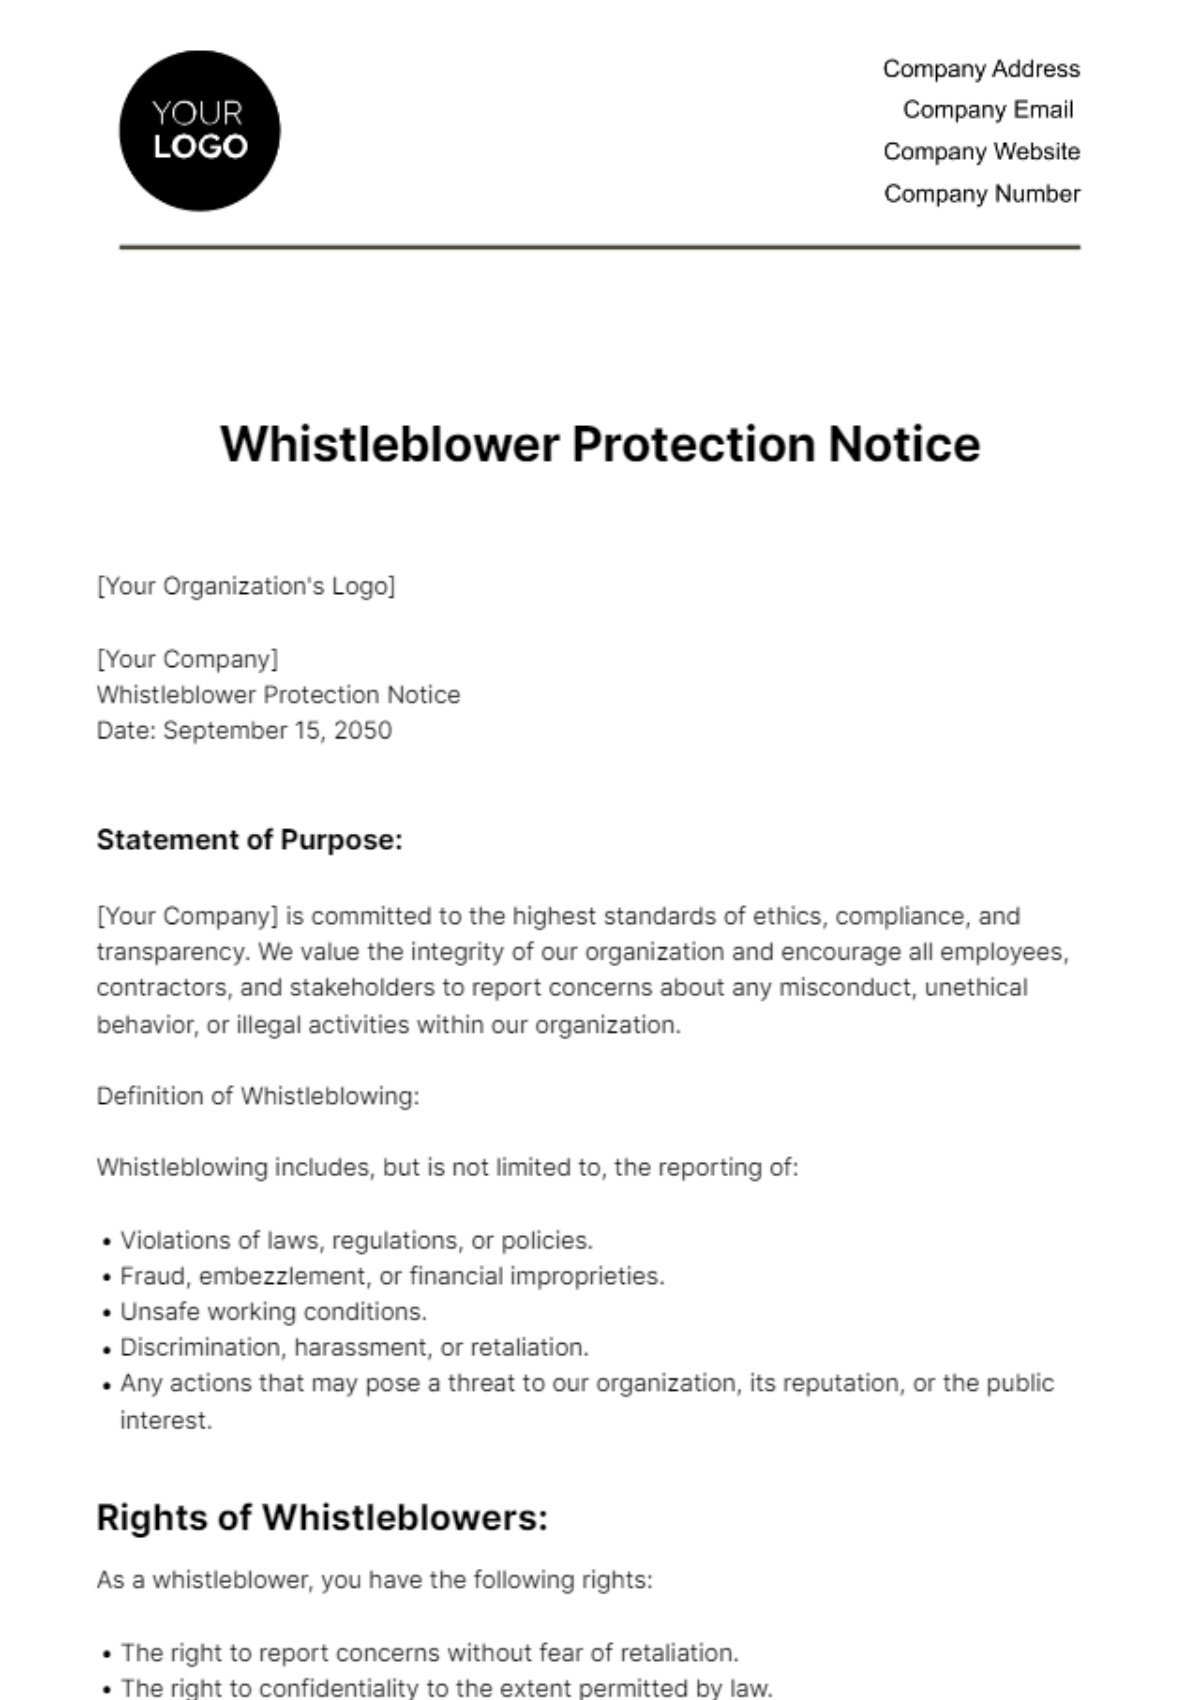 Free Whistleblower Protection Notice HR Template